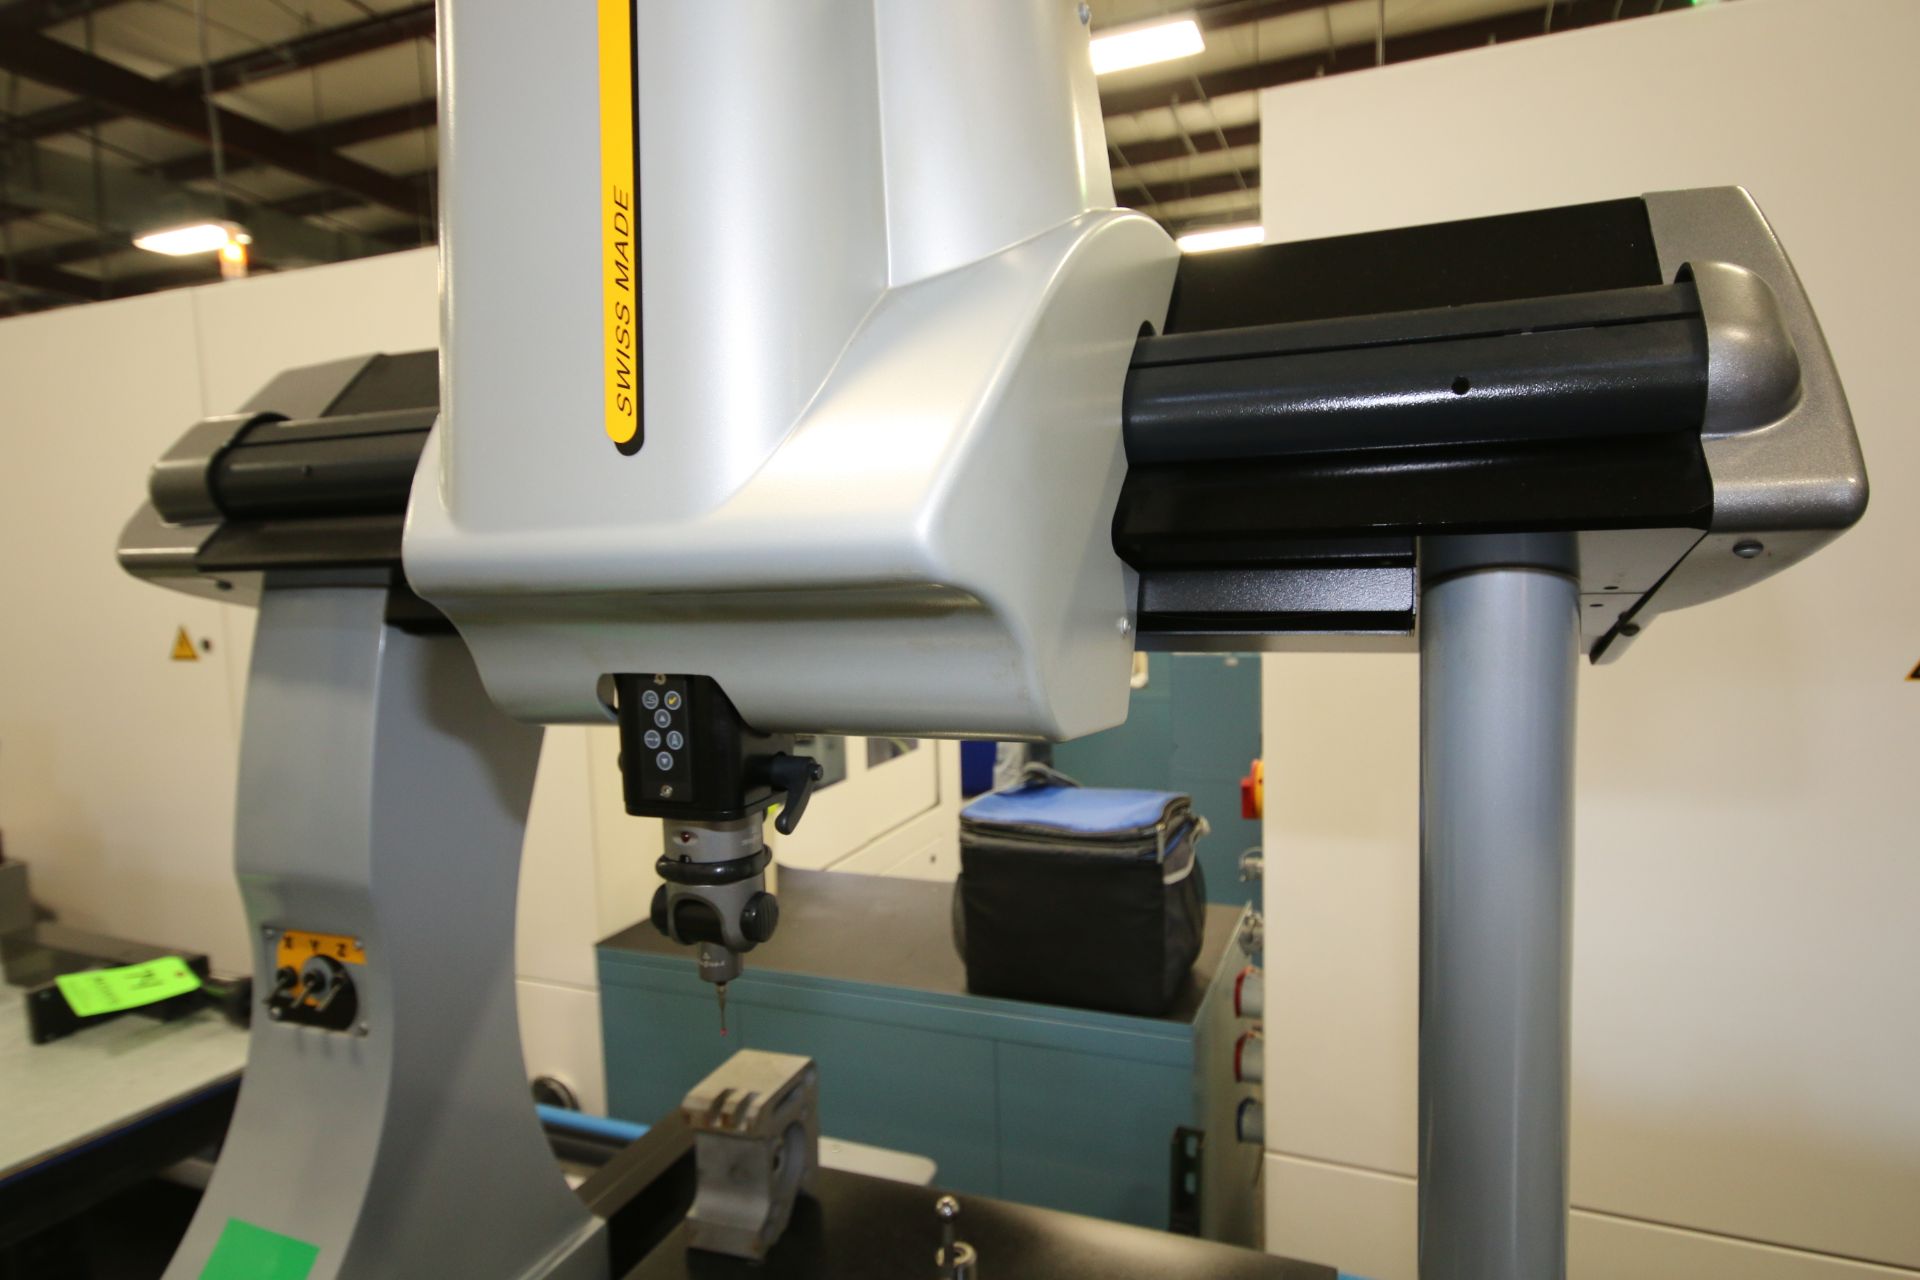 Tesa Reflex 3D Recorder CMM, S/N 10120019 with 22 x 30 Granite Plate, 3 Axis Joystick and Touchpad - Image 2 of 7